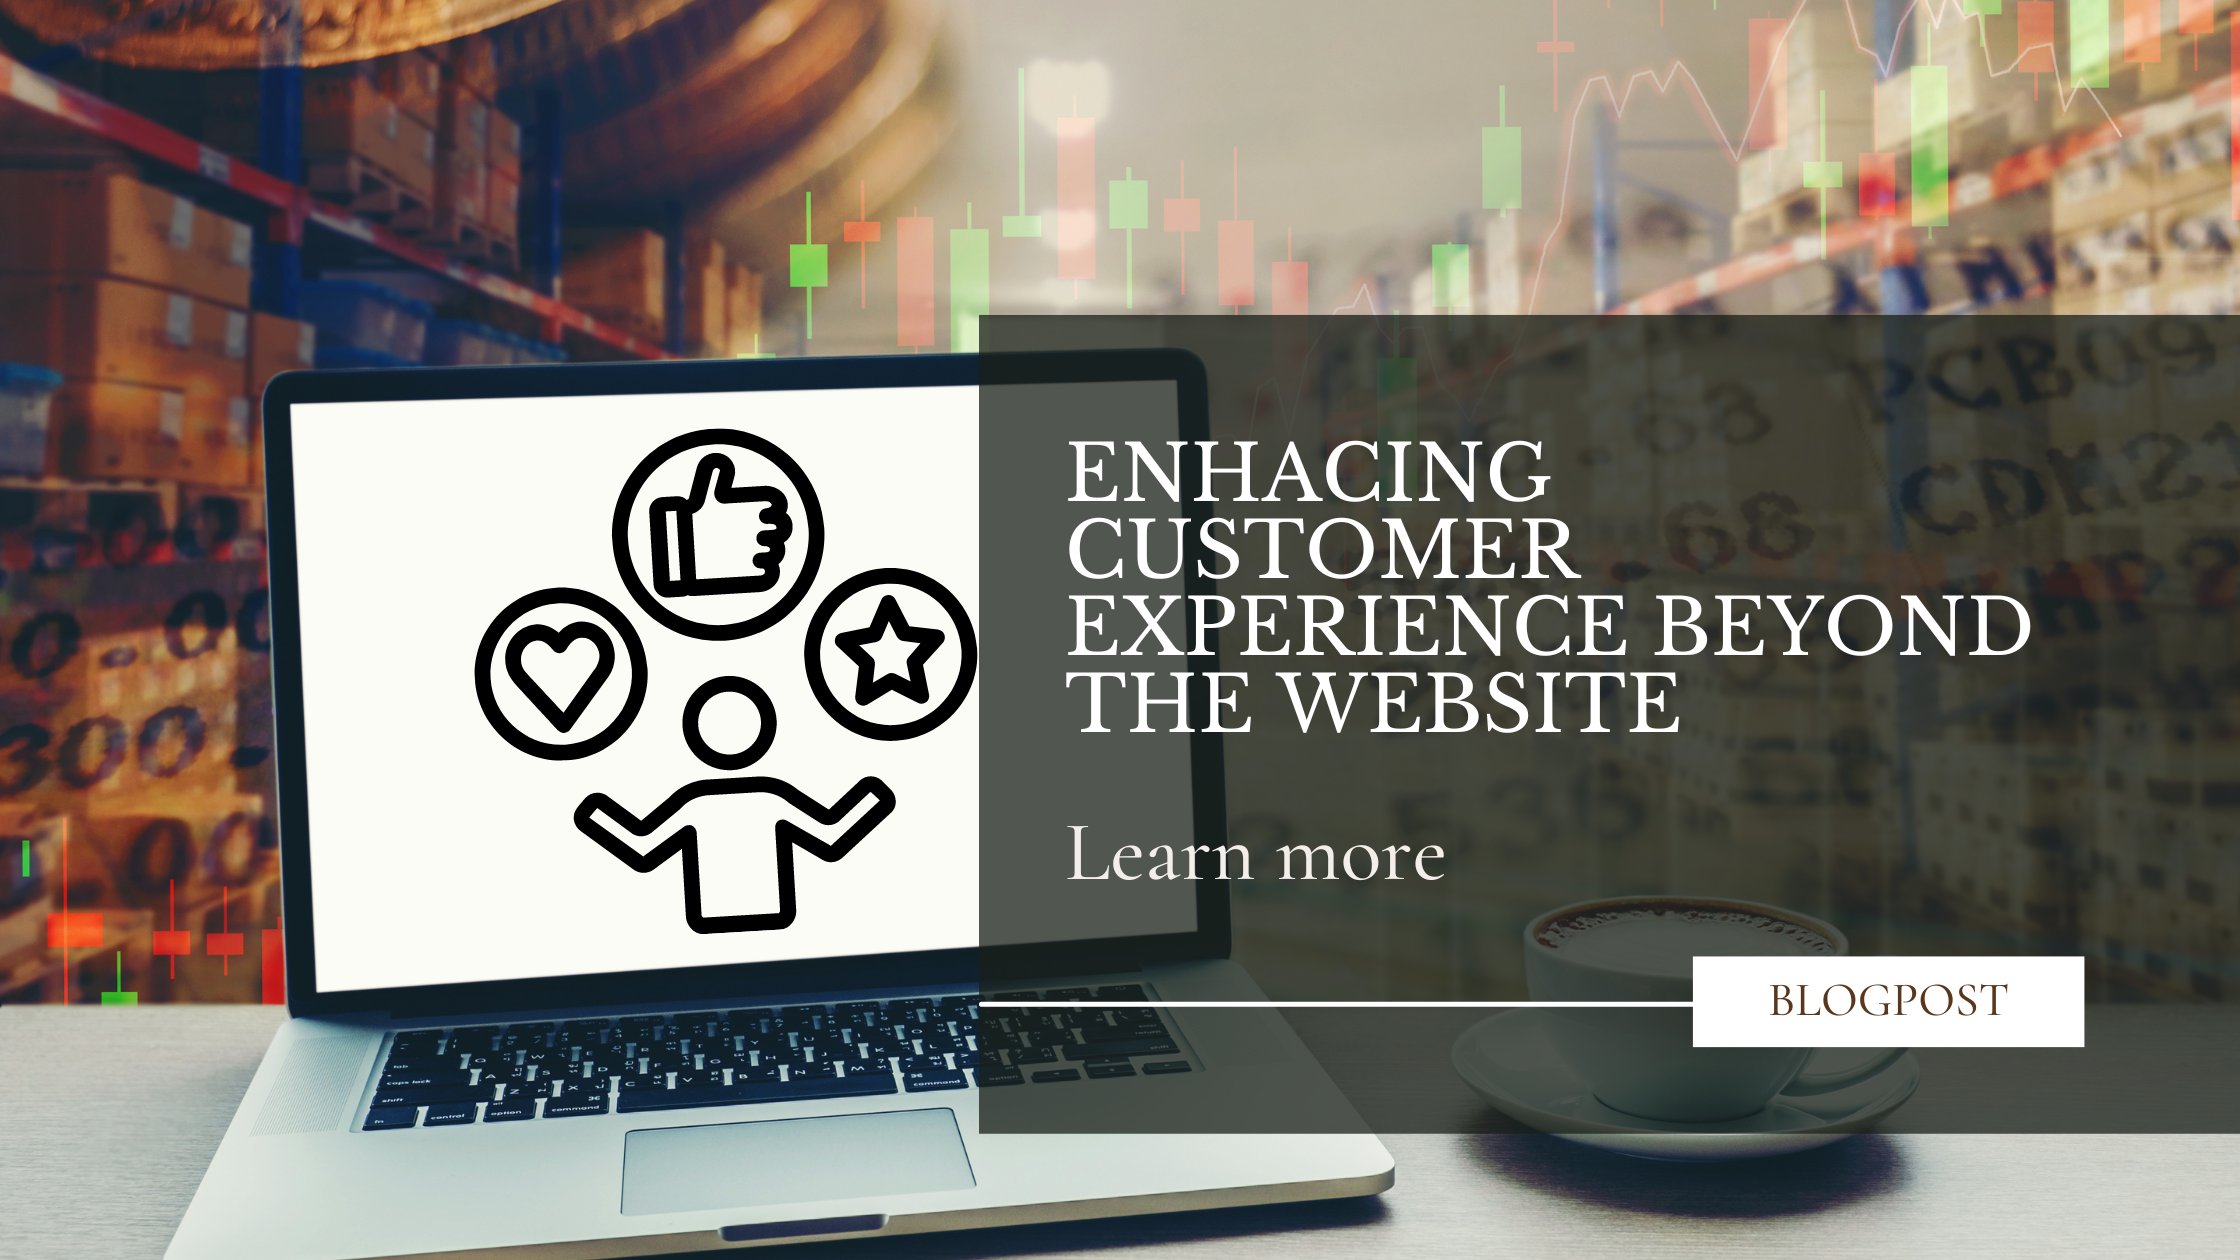 Enhancing the Customer Experience beyond the Website